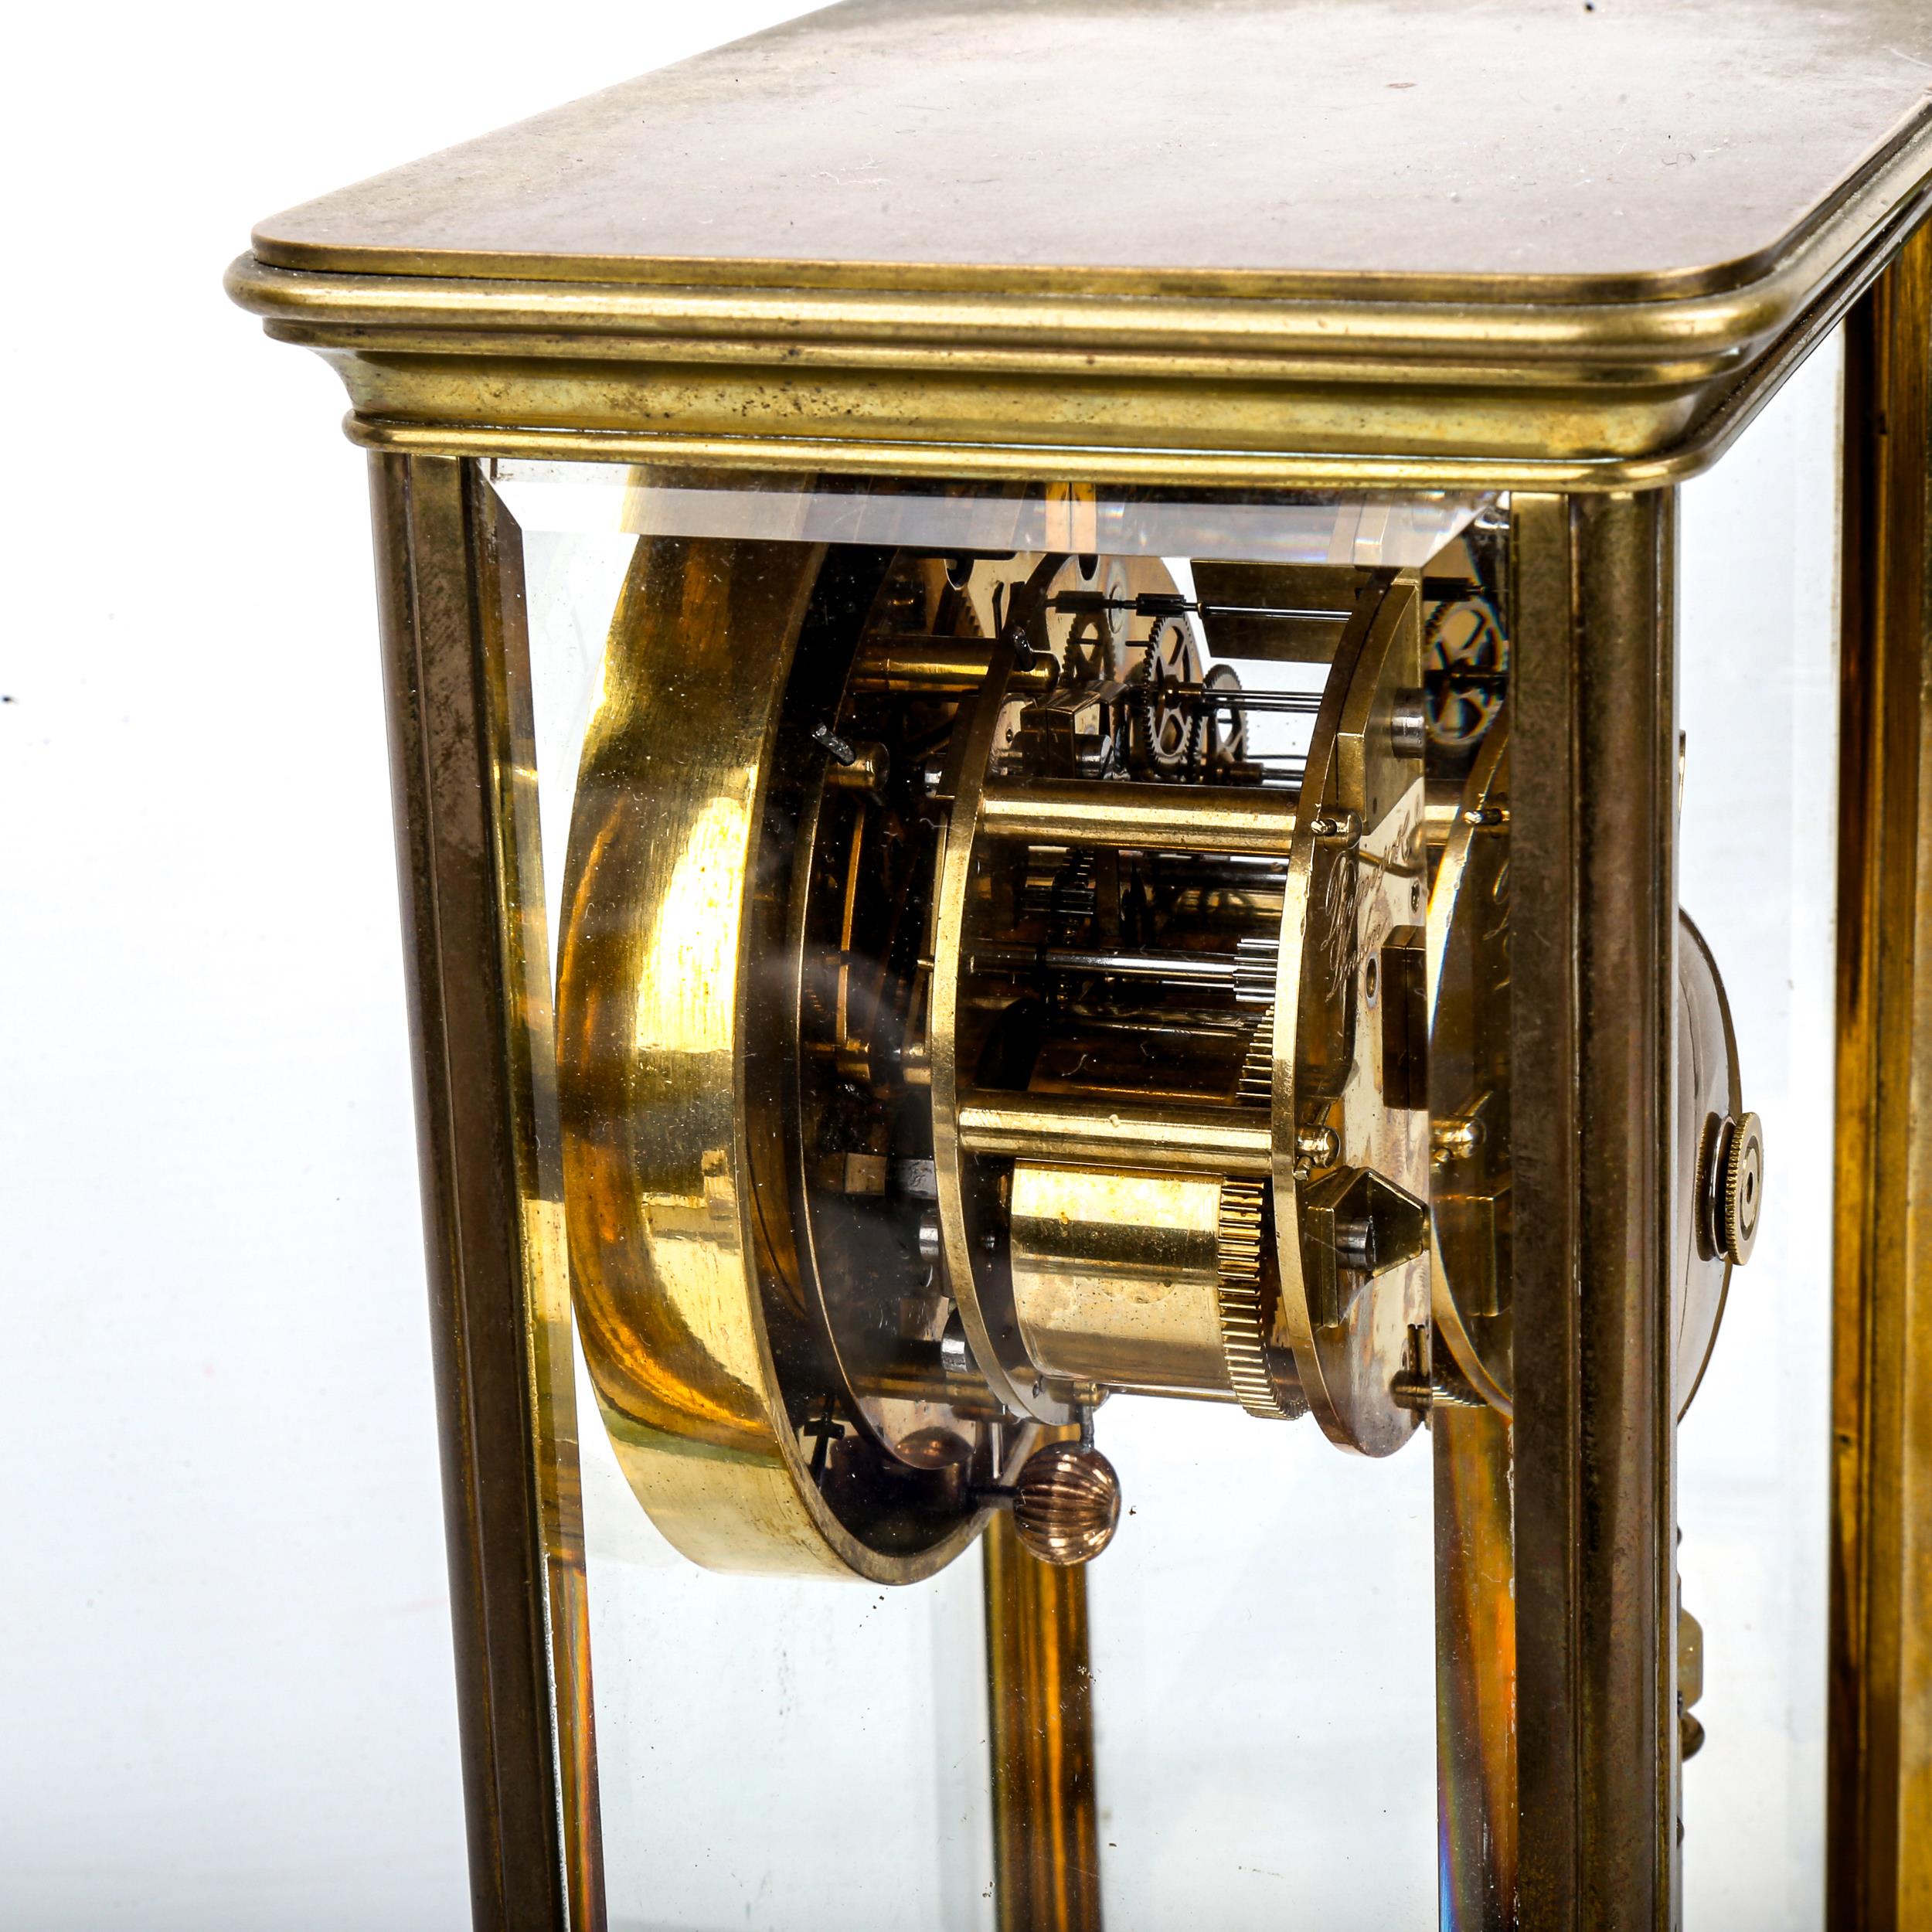 An early 20th century brass-cased 4-glass 8-day mantel clock, by Payne & Co of London, white - Image 3 of 5